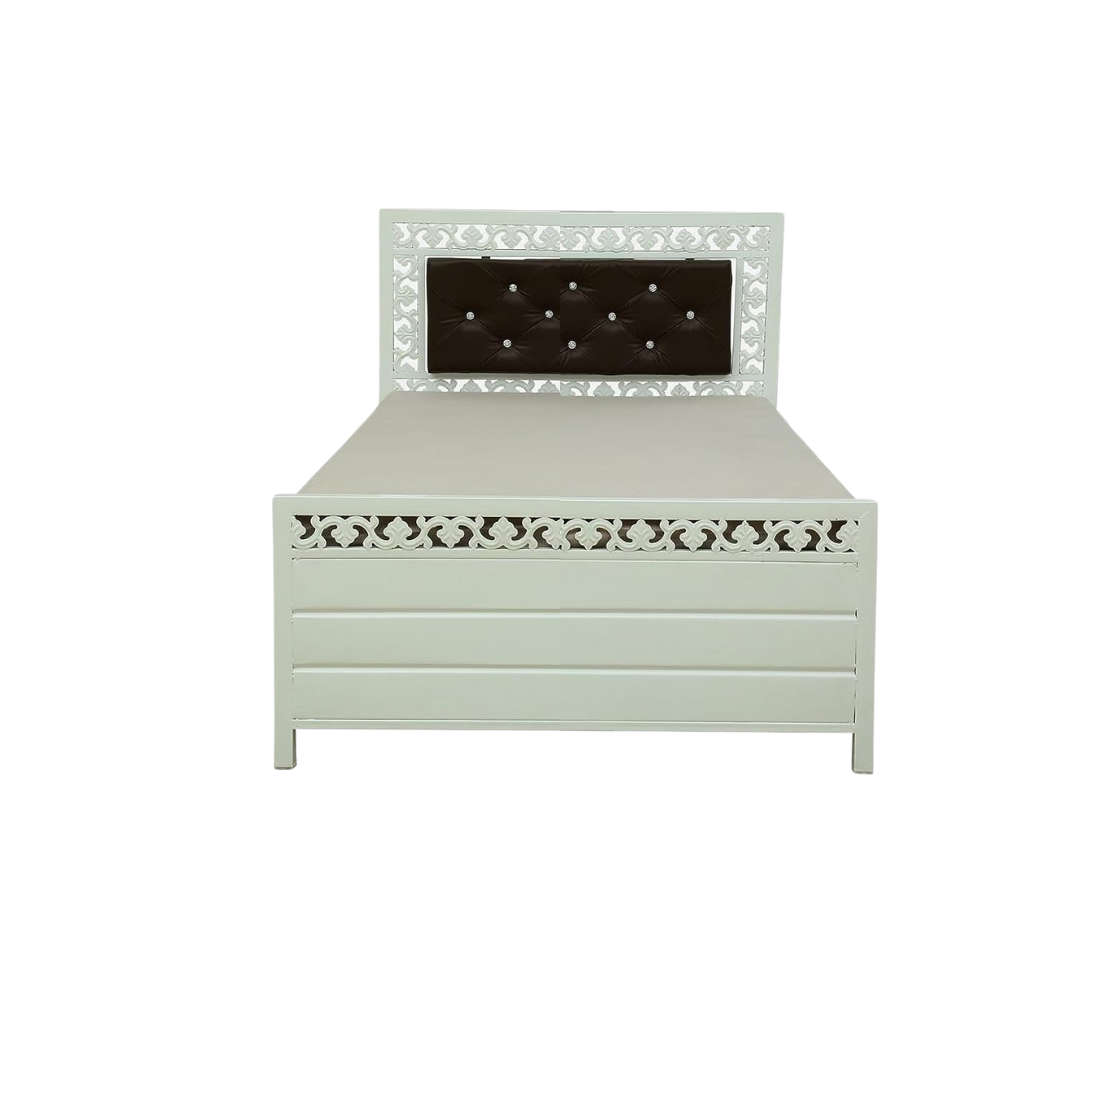 Cuba Hydraulic Storage King Metal Bed with Brown Cushion Headrest (Color - White)